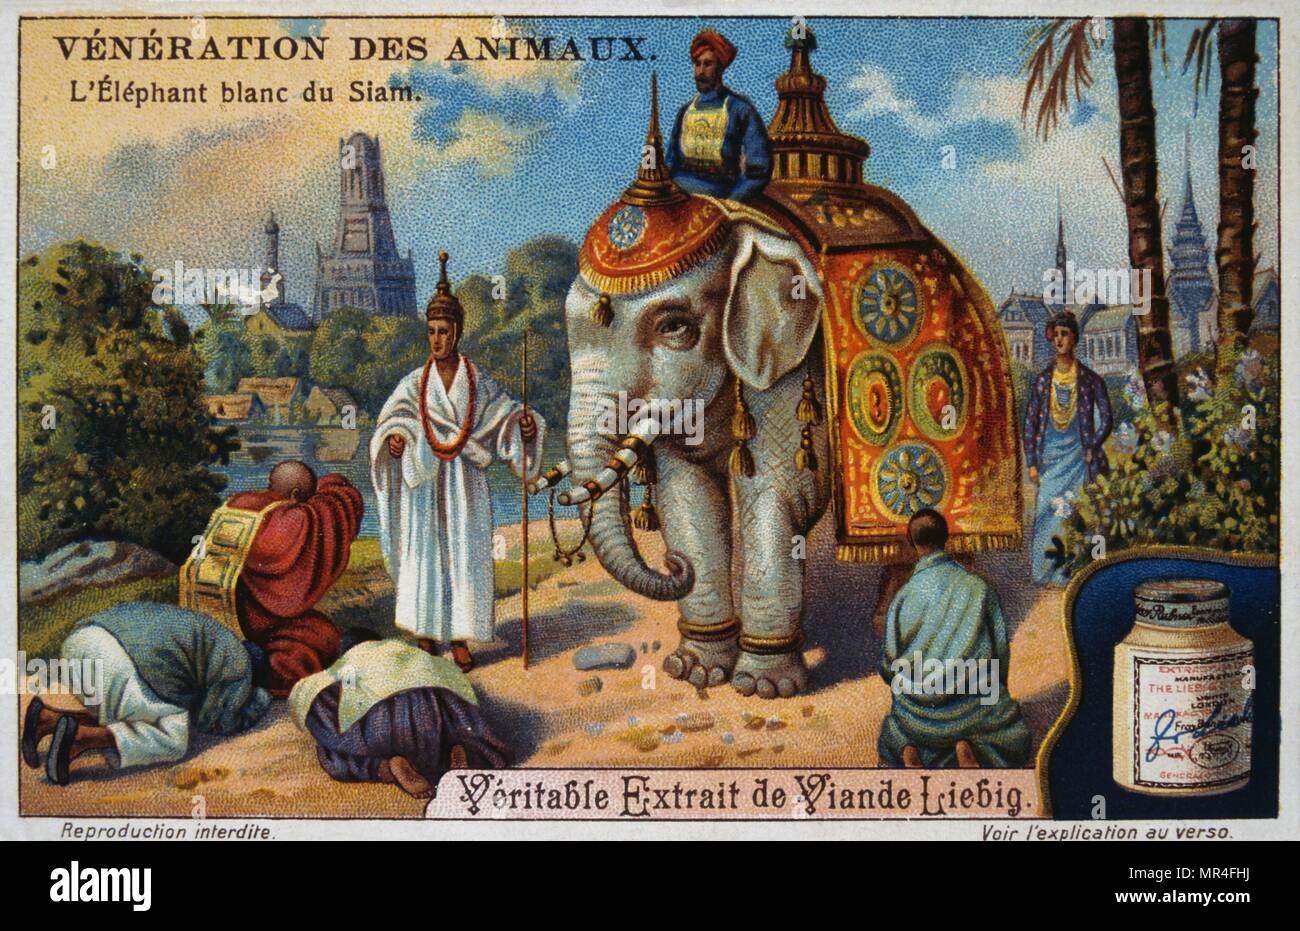 https://c8.alamy.com/comp/MR4FHJ/leibig-card-showing-a-siamese-white-elephant-at-a-ceremony-in-siam-thailand-1900-sacred-white-elephants-kept-by-southeast-asian-monarchs-in-burma-thailand-laos-and-cambodia-to-possess-a-white-elephant-was-regarded-and-is-still-regarded-in-thailand-and-burma-as-a-sign-that-the-monarch-reigned-with-justice-and-power-and-that-the-kingdom-was-blessed-with-peace-and-prosperity-MR4FHJ.jpg